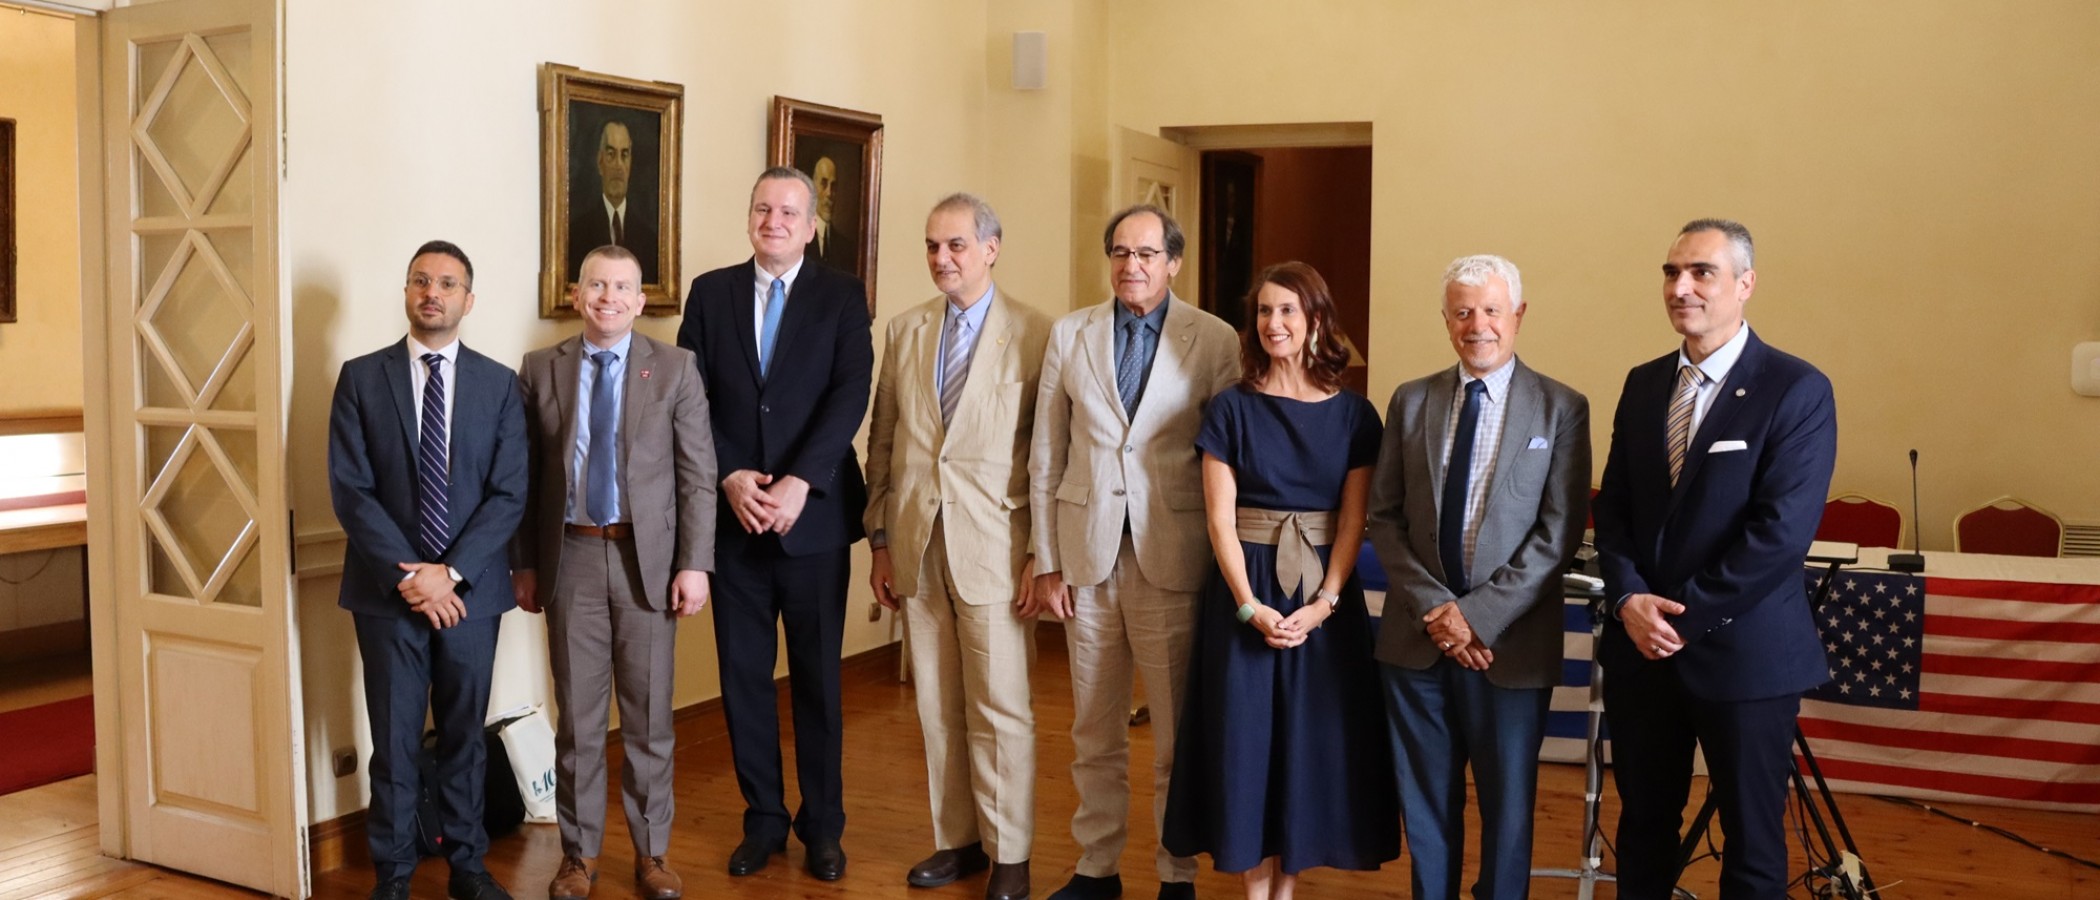 Collaboration meeting held between Texas A&M University and the Agricultural University of Athens, towards co-creating sustainable solutions within the framework of the “METAVASIS” Program